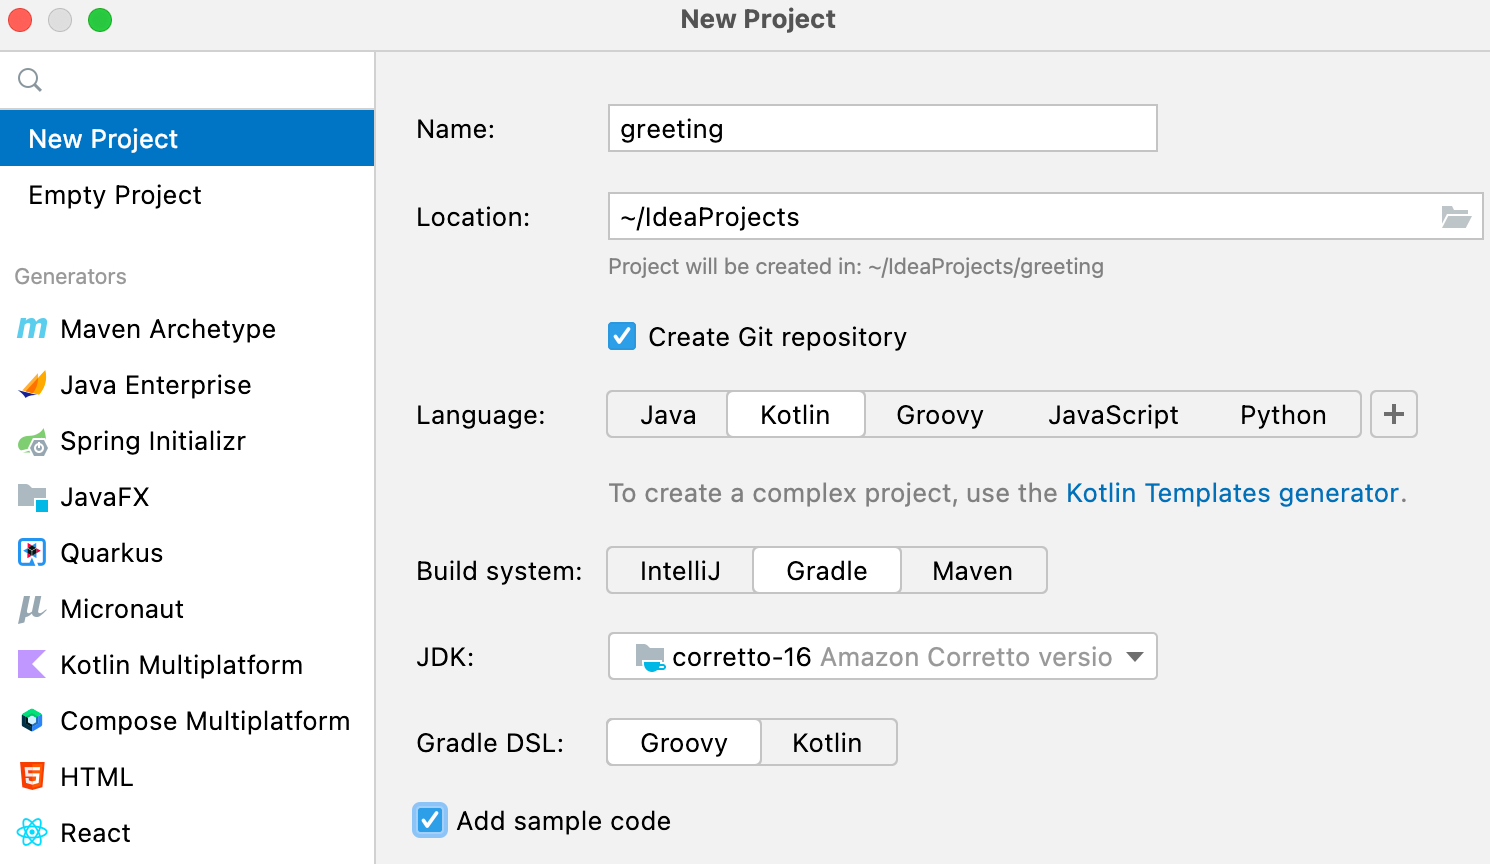 New Kotlin project with the Gradle build system with Groovy DSL